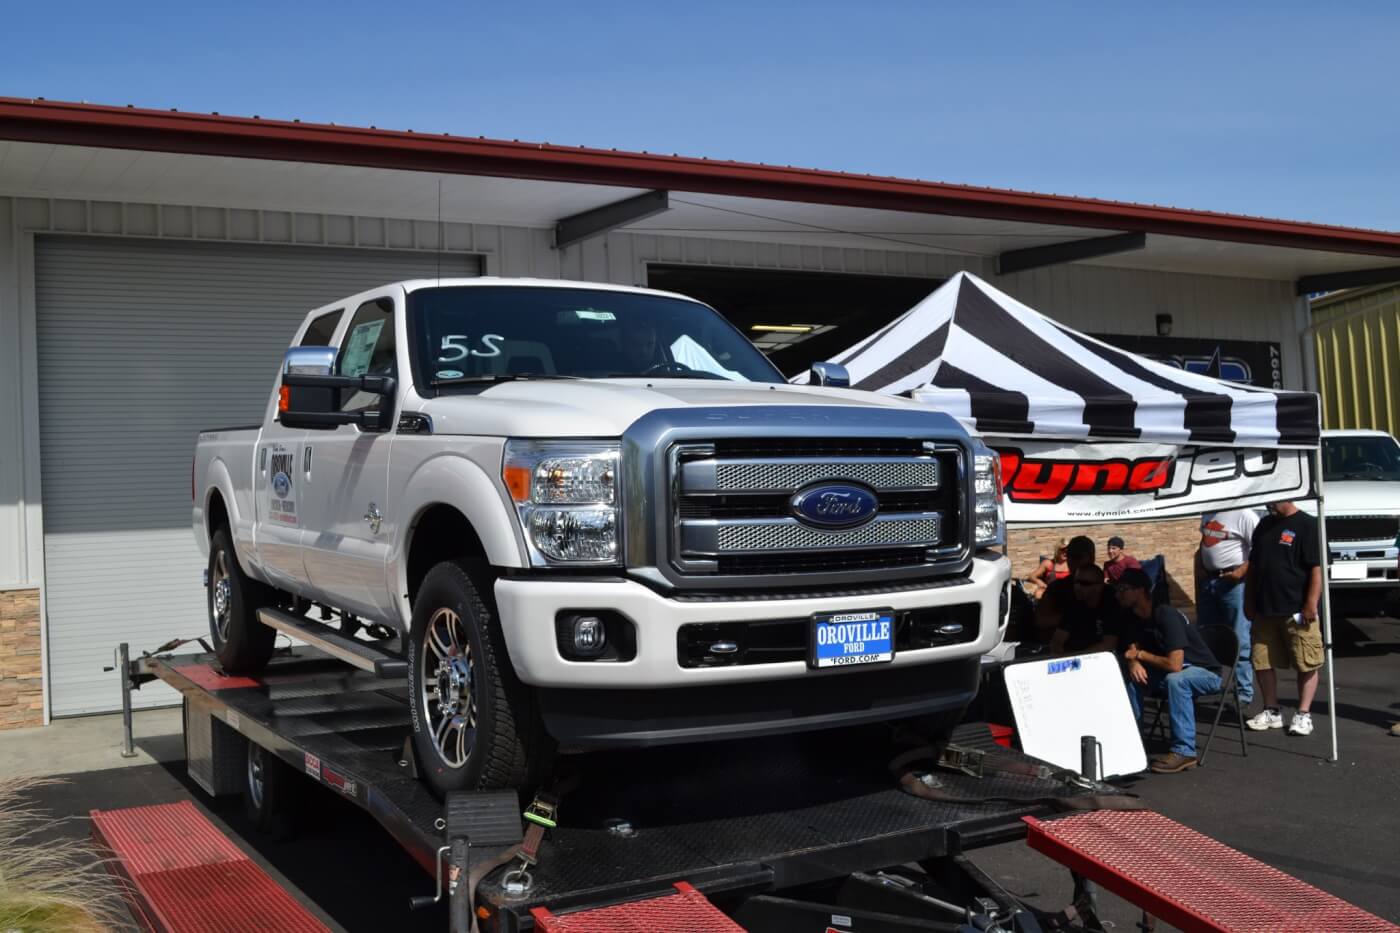 Oroville Ford showed up with a brand new 2015 Ford, which put down an impressive 357m rwhp on the small-roller DynoJet. Remember, this is a stock truck! 